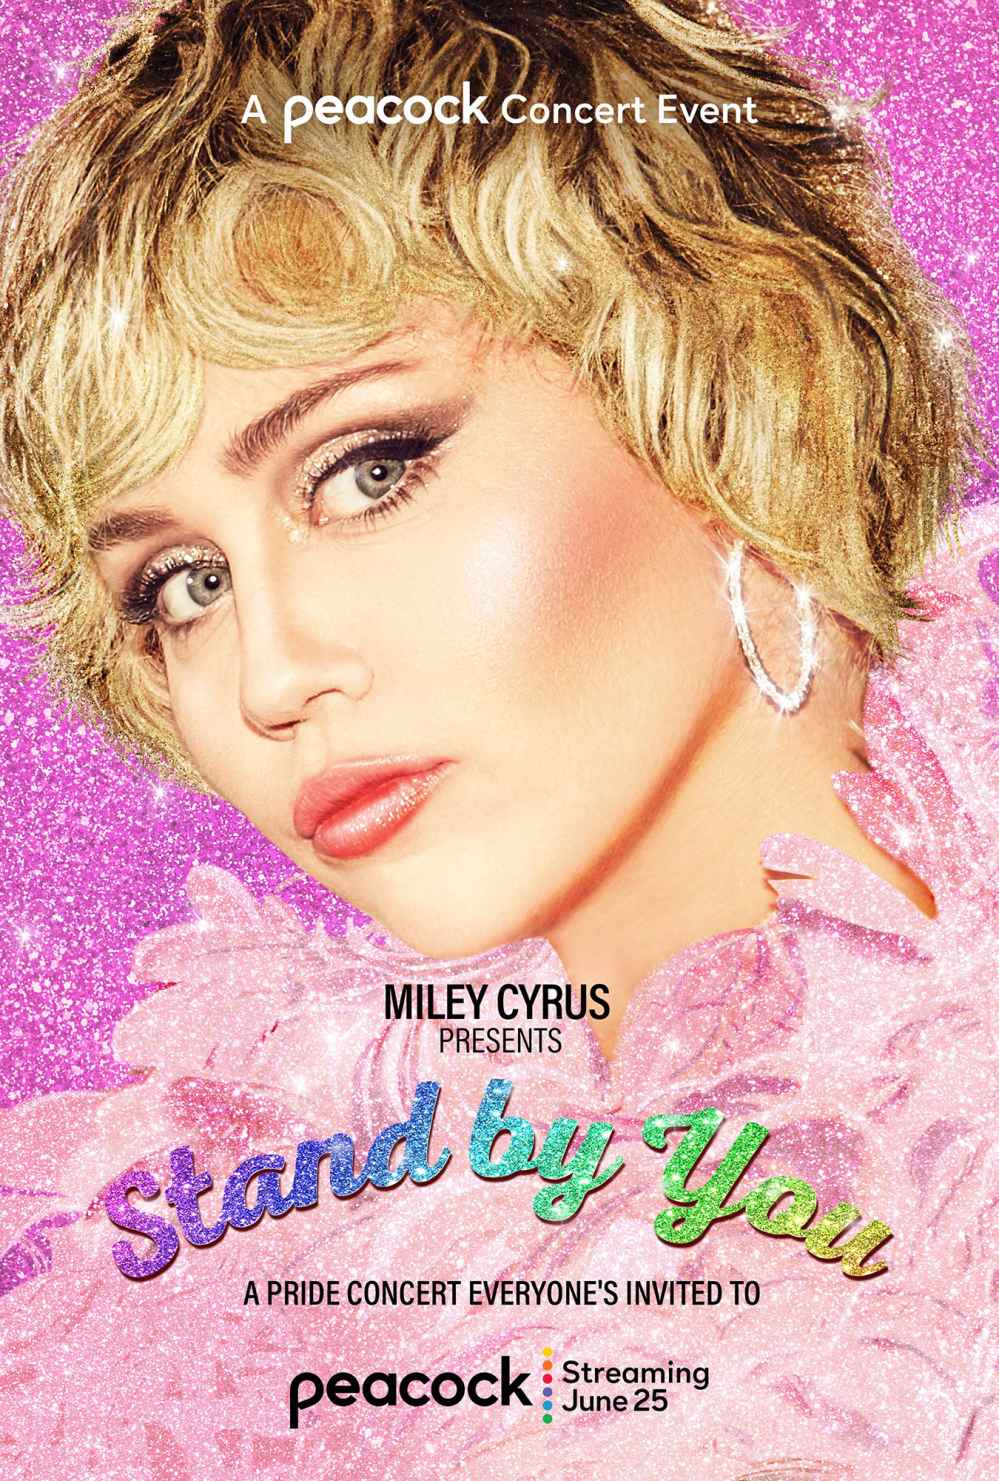 Miley Cyrus to Drop Exclusive Concert Special to Celebrate Pride Month 2